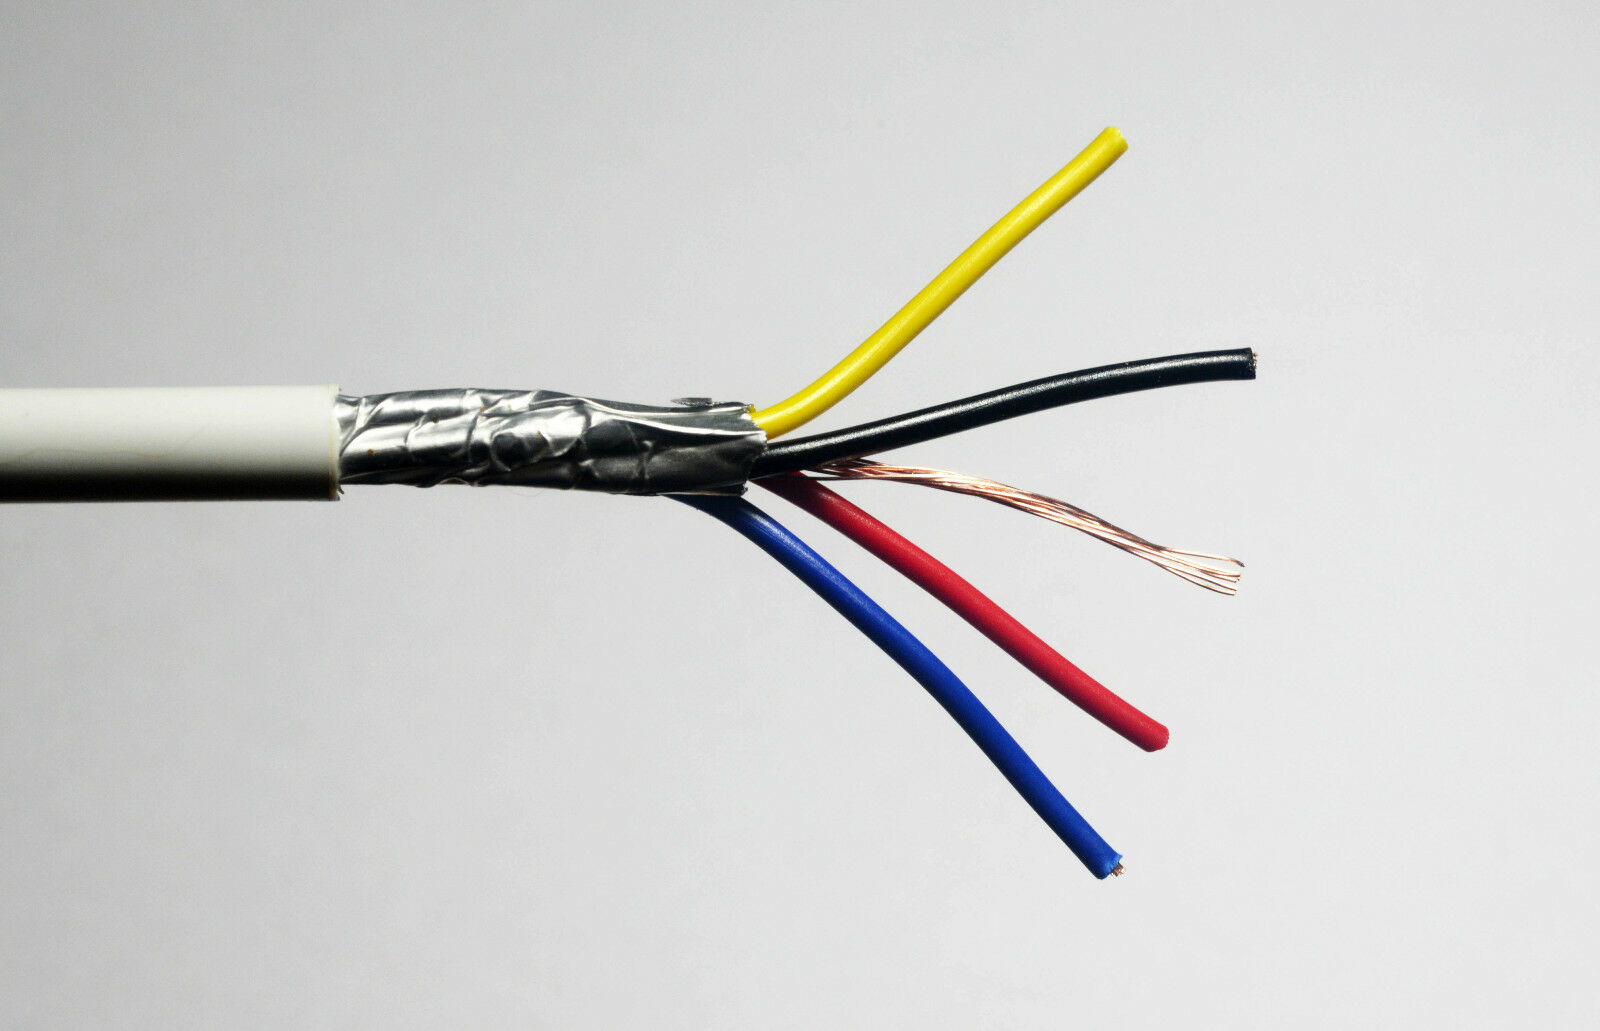 10 Feet 18/4 Awg -  Shielded Stranded Wire / Cable  Cnc Routers / Stepper Motors